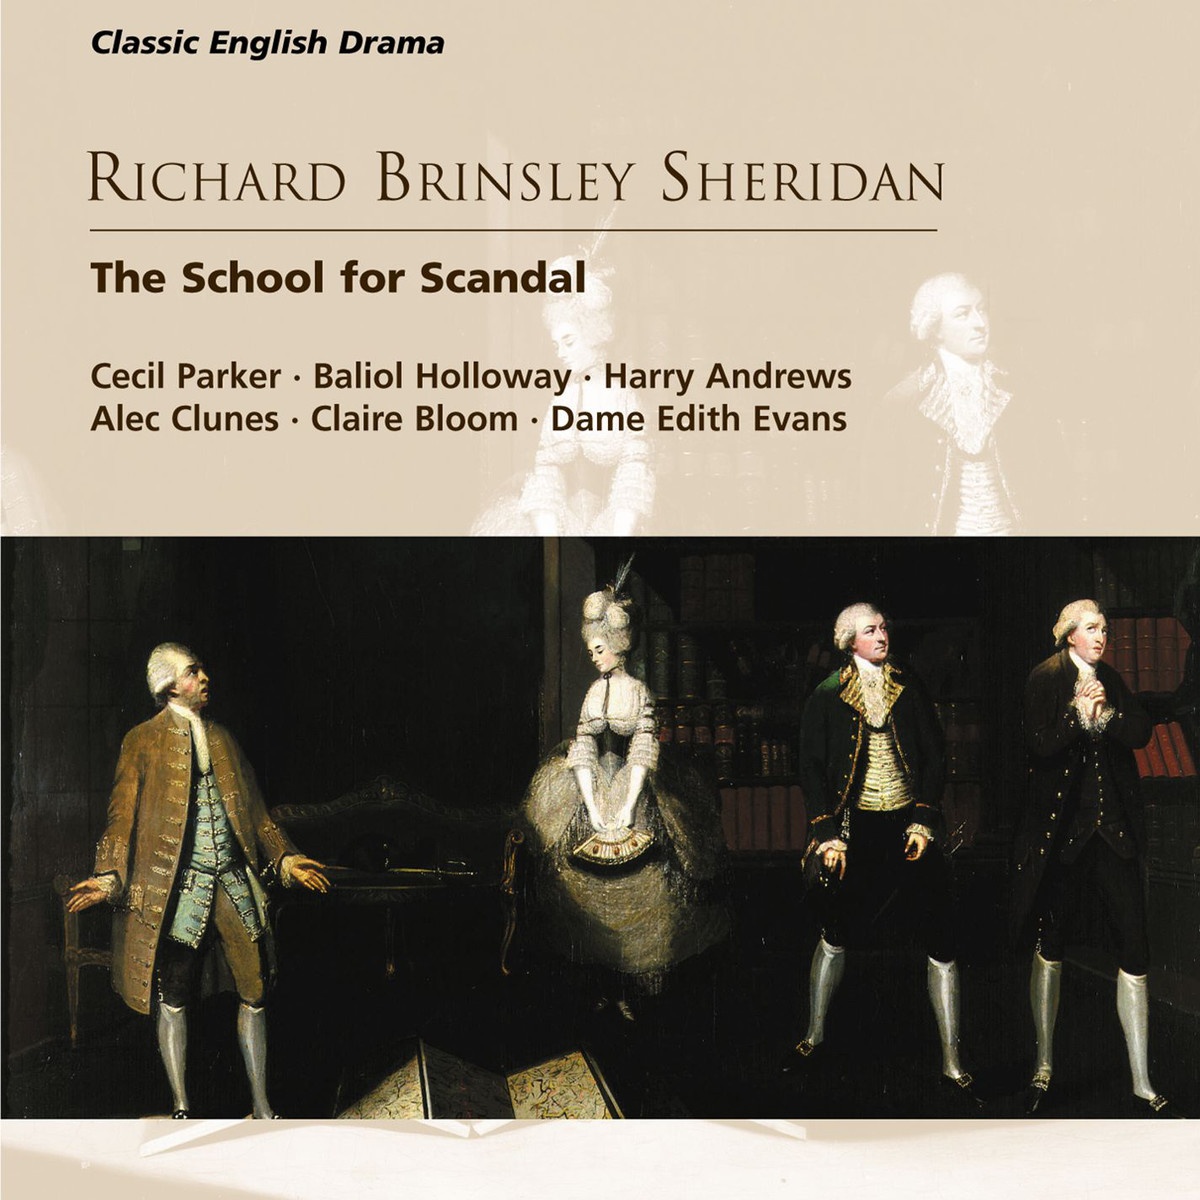 The School for Scandal - A comedy in five acts, Act I, Scene 2 (At Sir Peter's): When an old bachelor marries a young wife (Sir